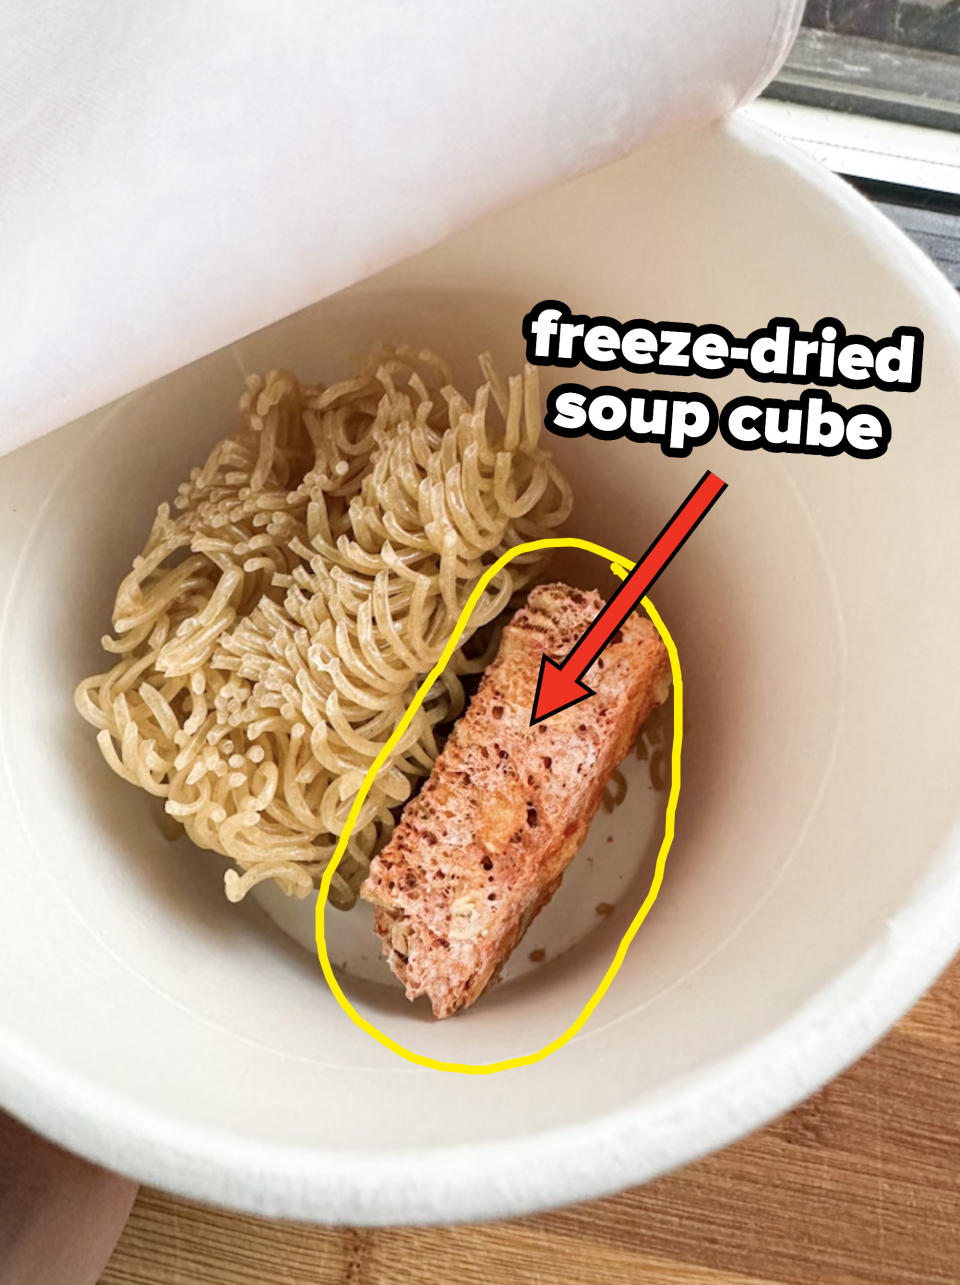 arrow pointing to freeze dried soup cube in the cardboard cup